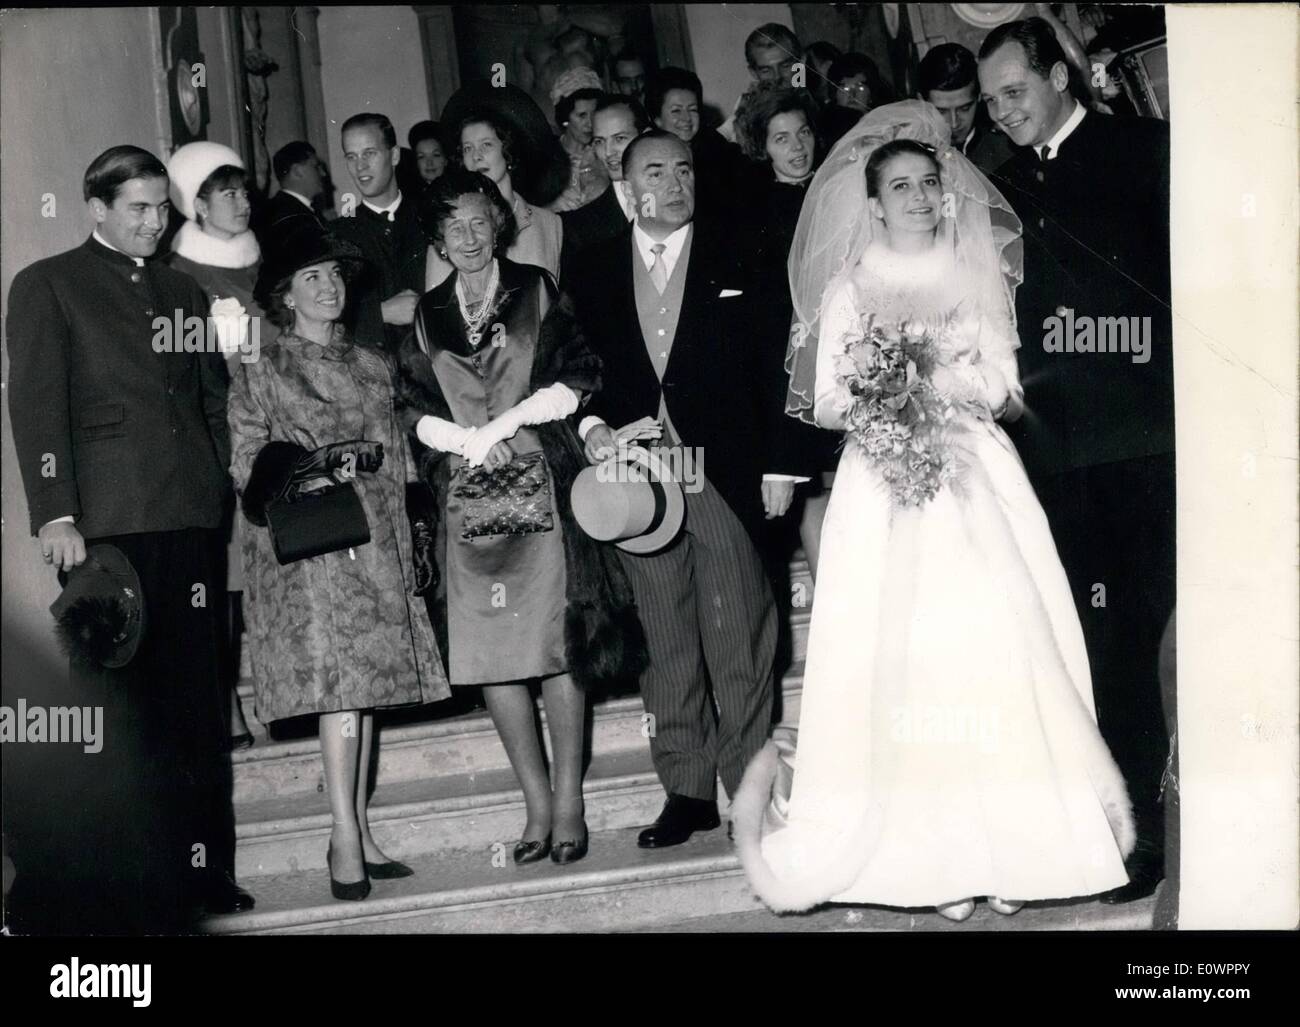 Nov. 11, 1963 - ''Marriage of the Year'' at Salzburg In spite of the hard resistance of his brother Prince Ernst August (47), Chef of the Welfe-House, Prince Christian of Hannover (44) married today (23.11.1963) at Salzburg the 17 years old Belgium Mireille Dutry. Queen Friederike of Greece had not come to the festive event, for she was not consent with the marriage. She sent her son Crownprince Konstantin to Salzburg Stock Photo